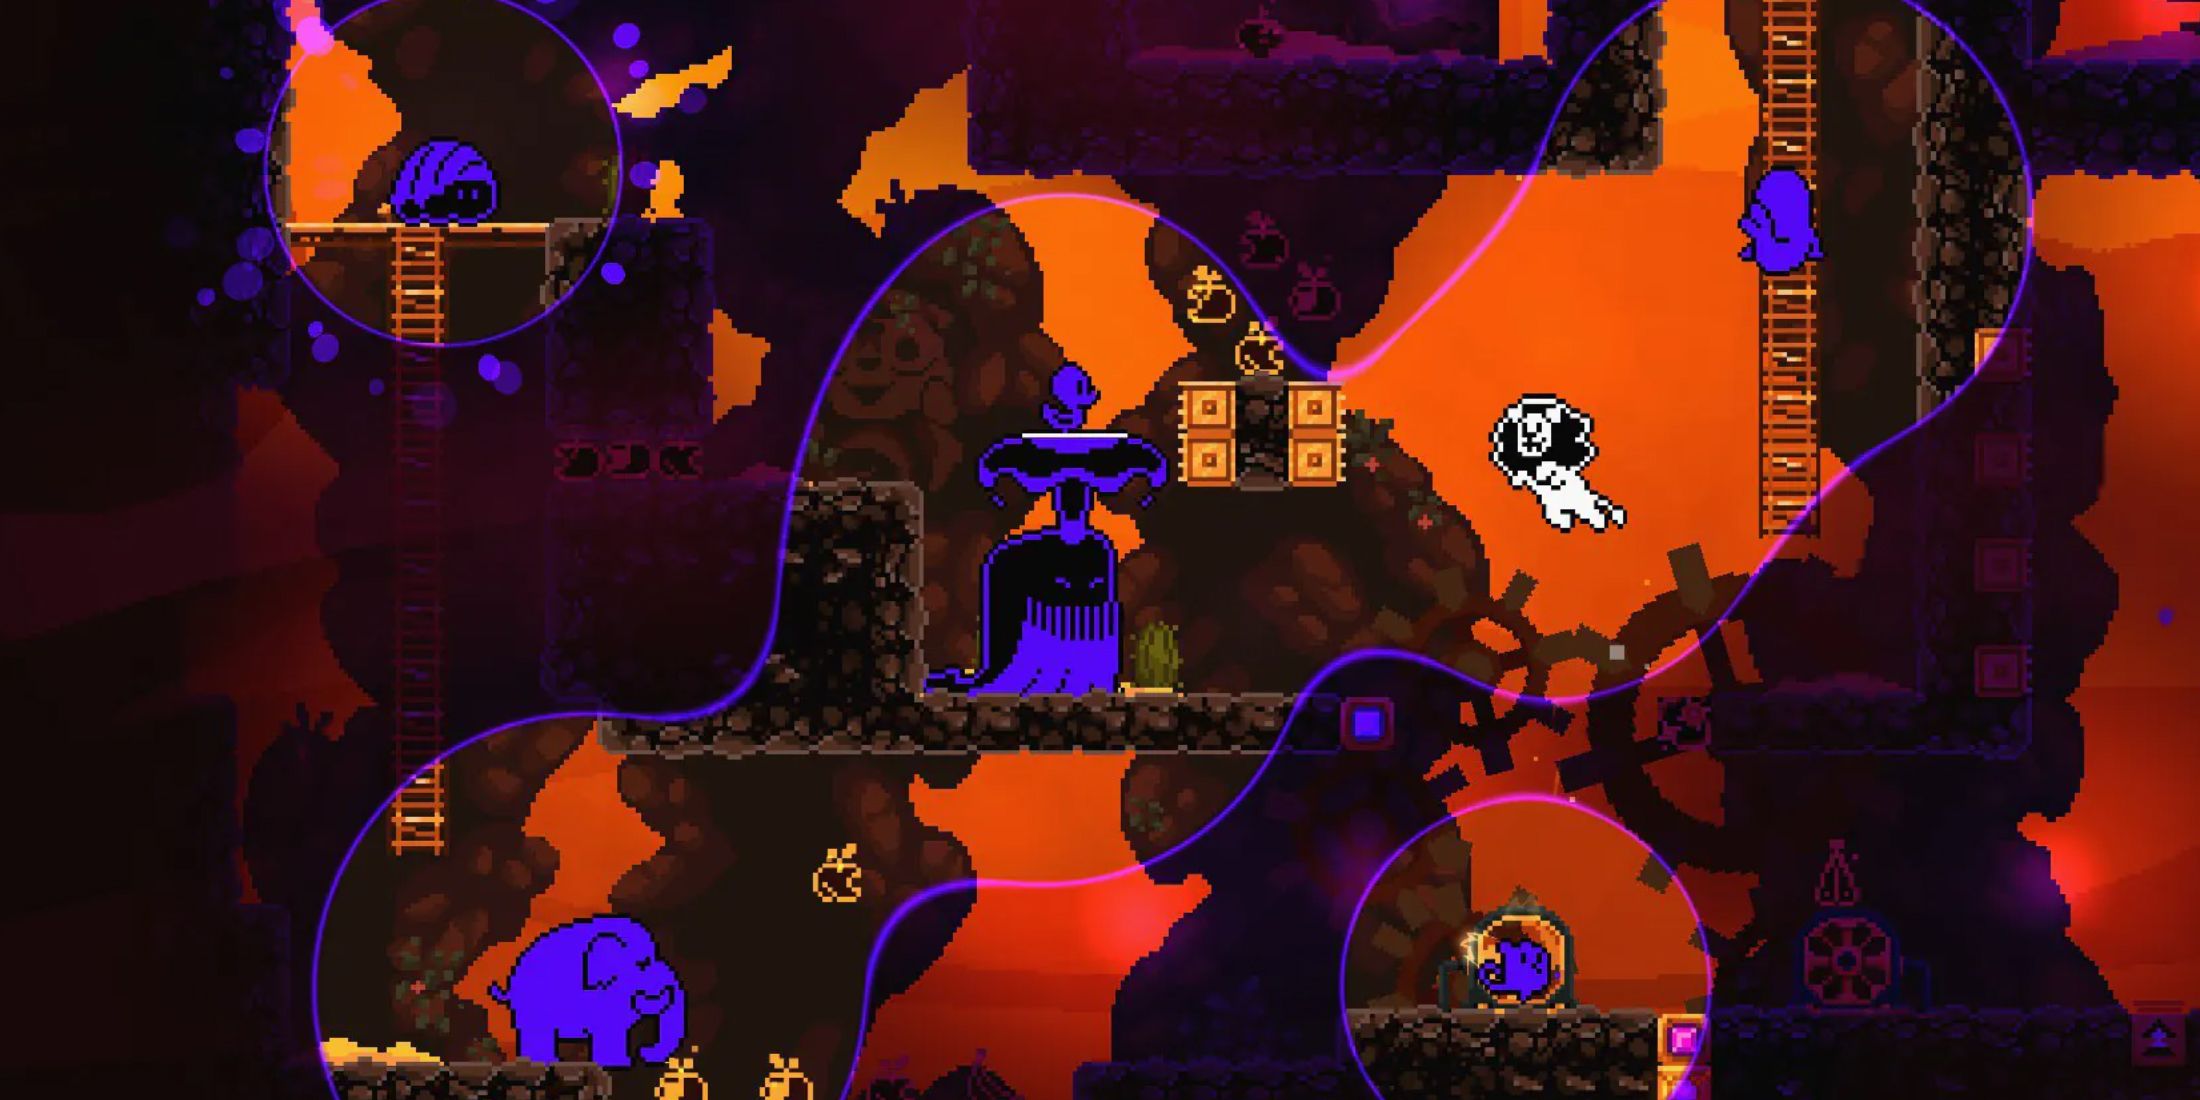 karmazoo multiplayer online collaborative platformer built on true co-operation and sharing kindness